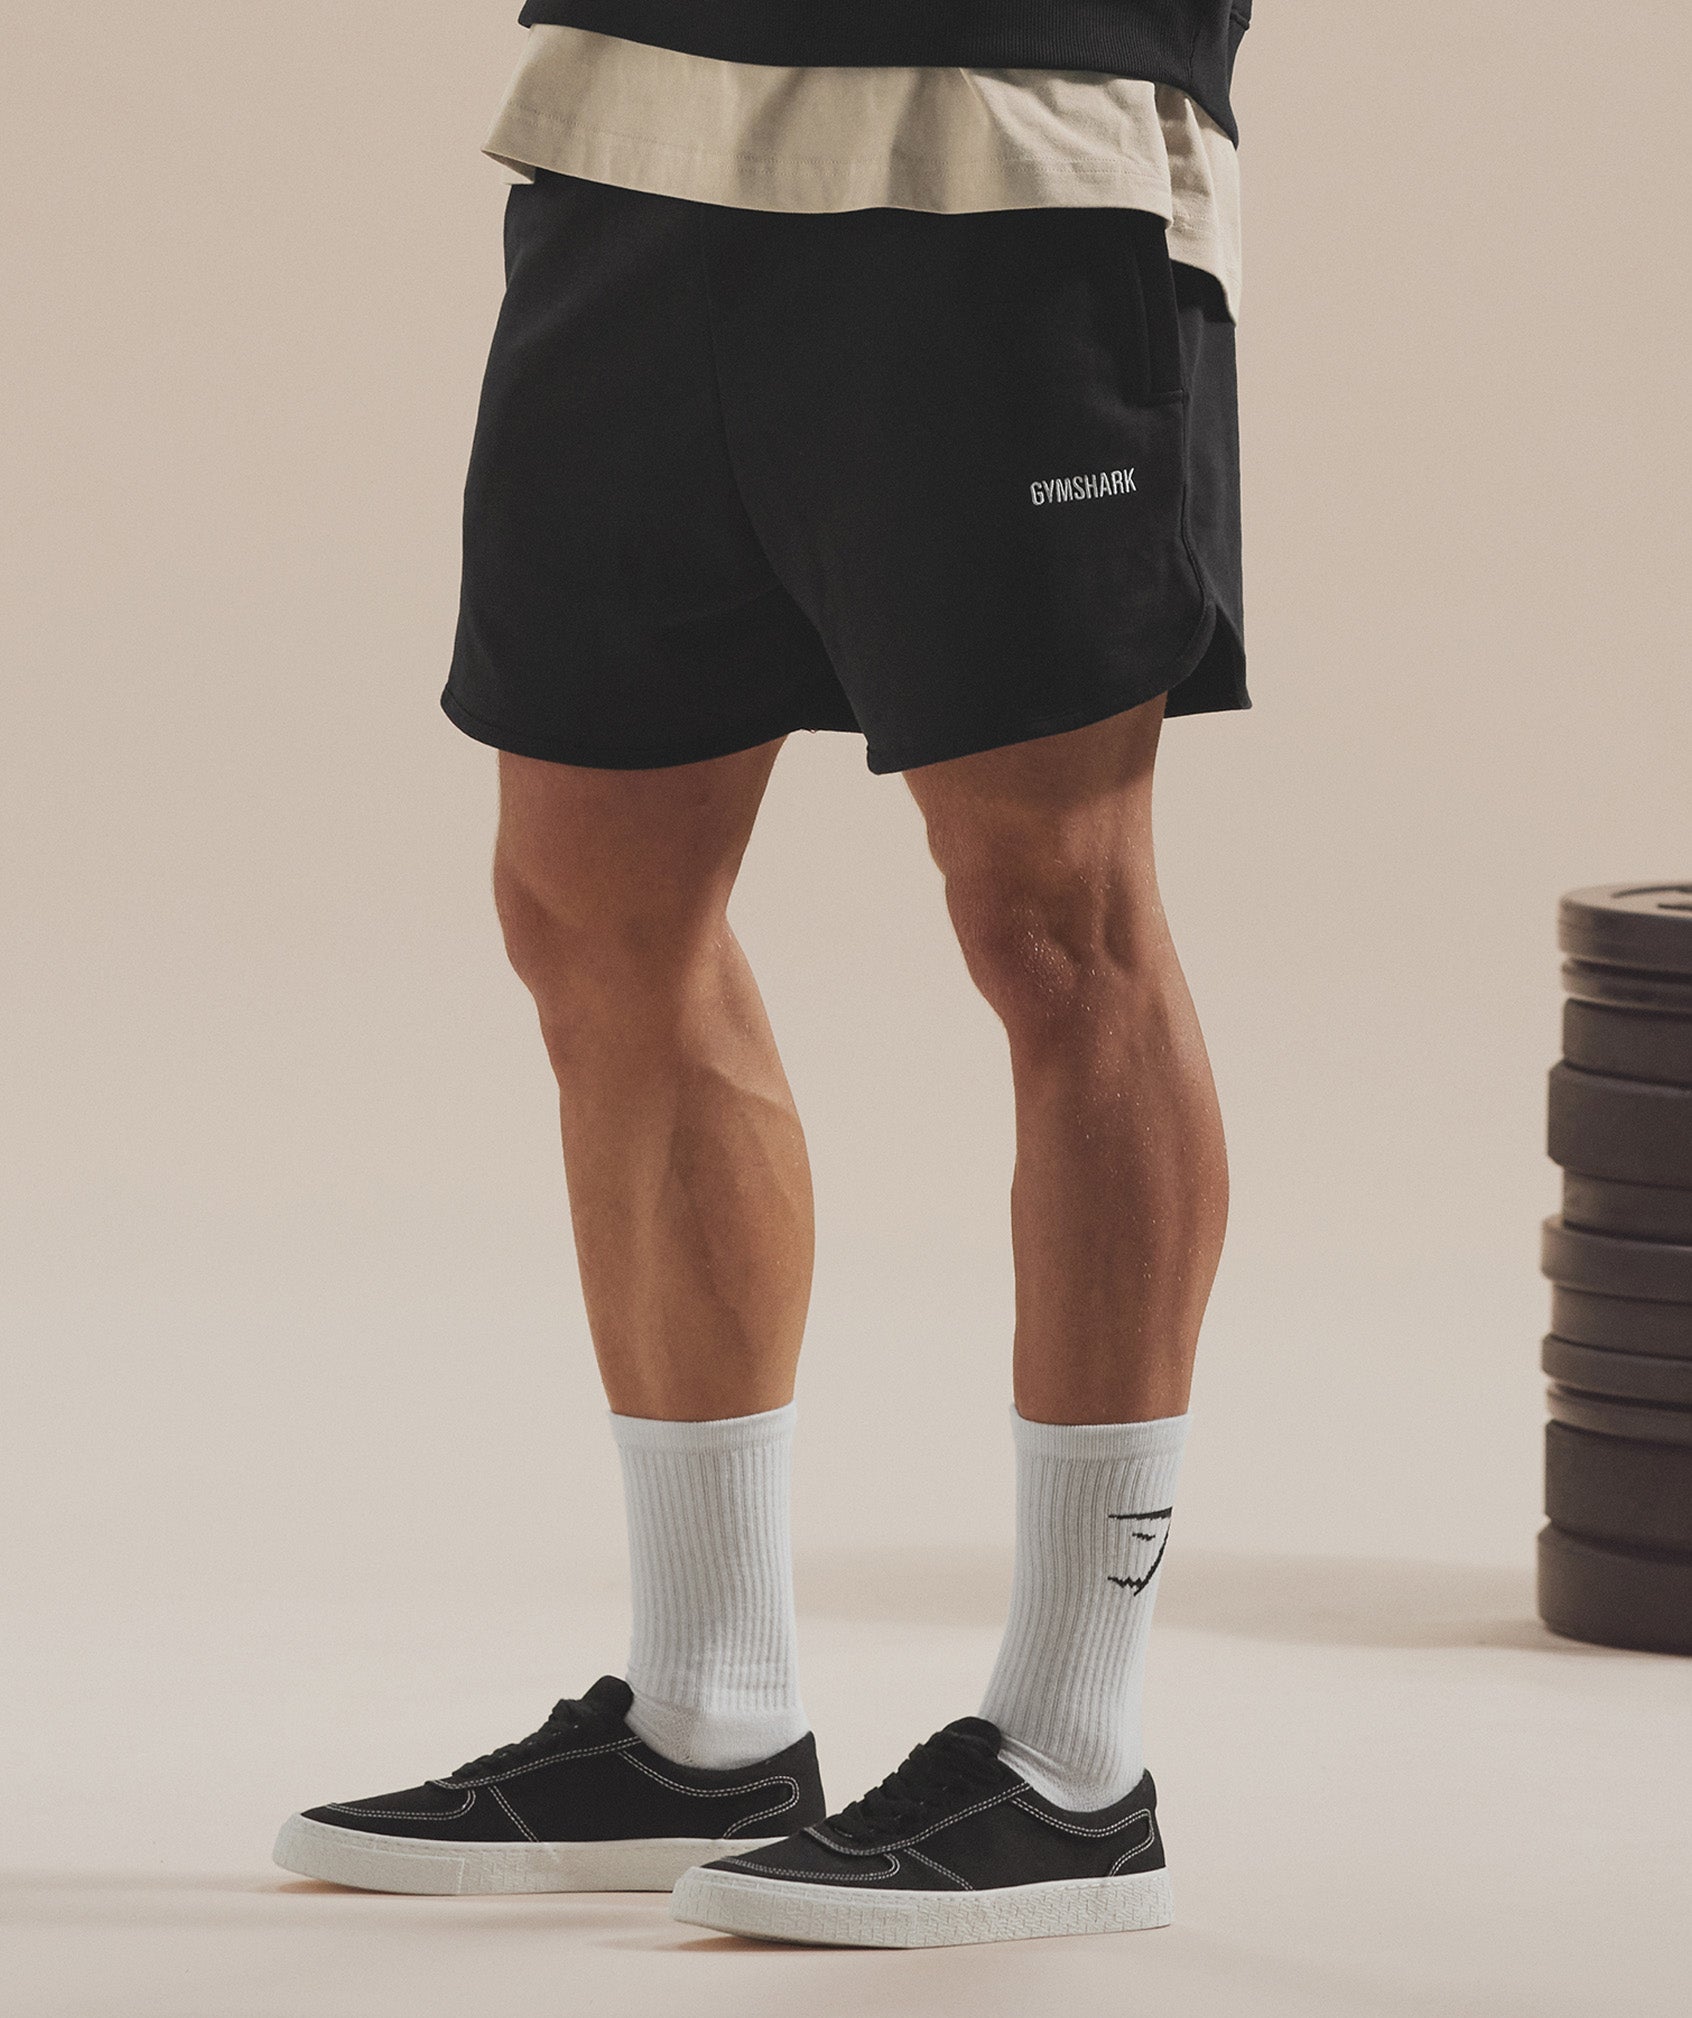 Rest Day Sweats 4'' Lounge Shorts in Black